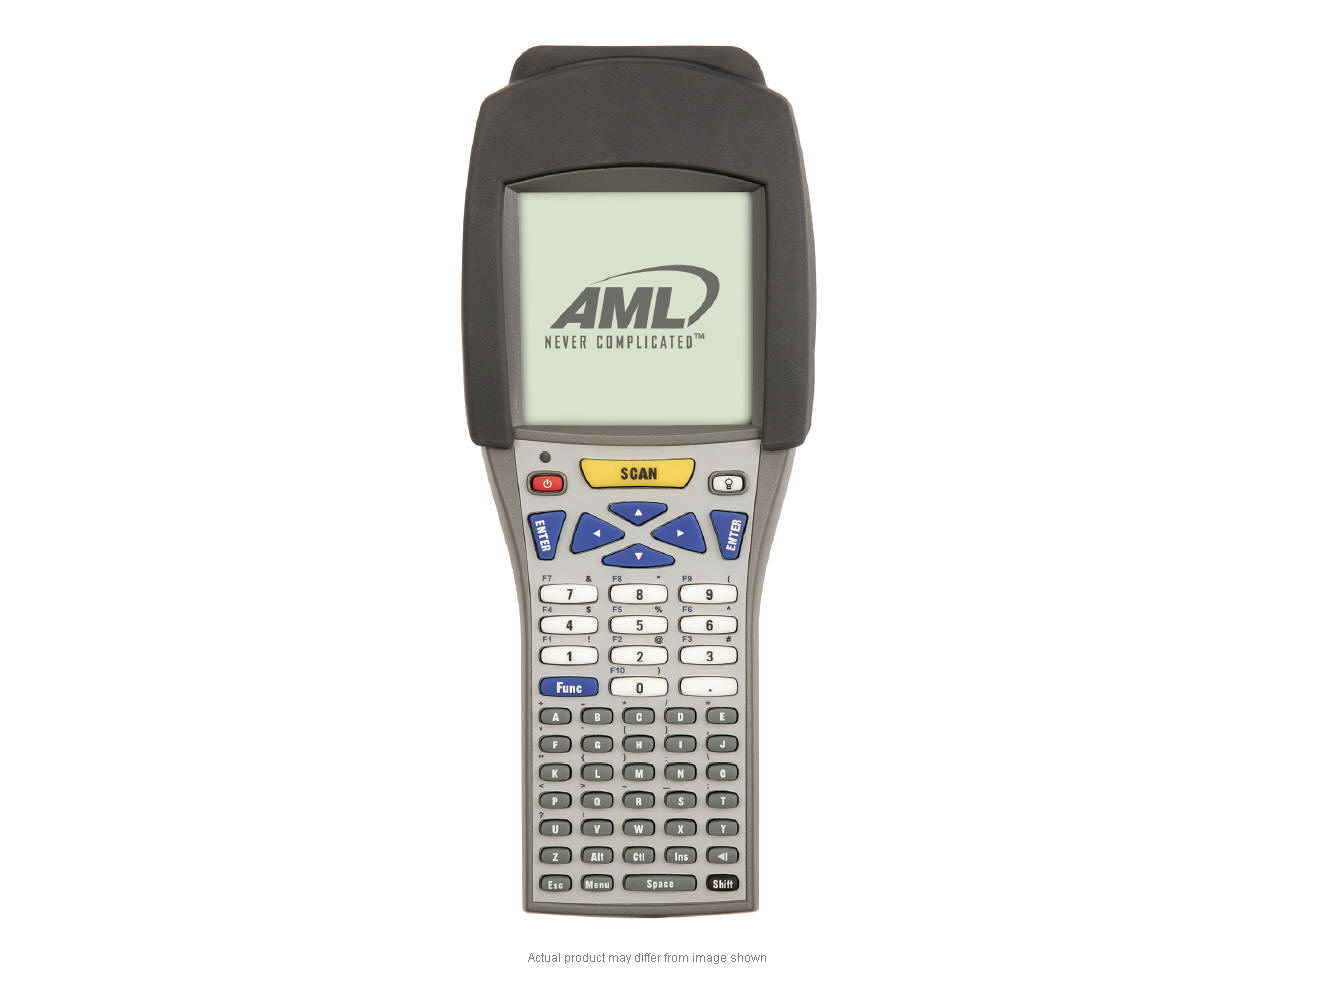 M71V2-0101-00 M71V2, 802.11B, LASER, 55K ALPHA KYPD AML, M71V2, WIRELESS HANDHELD TERMINAL, 802.11B, LASER, 55-KEY ALPHANUMERIC M7221 Wireless Hand held Terminal, pre-loaded with Telenet Client, 802.11b/g, Laser, Alpha, No handle AML, DISCONTINUED ONCE STOCK IS DEPLETED REFER TO M7500-0101-00, M71V2, WIRELESS HANDHELD TERMINAL, 802.11B, LASER, 55-KEY ALPHANUMERIC, DISCONTINUED REFER TO M7500-0101-00 OR M7501-0101-00 ONCE STOCK IS DEPLETED